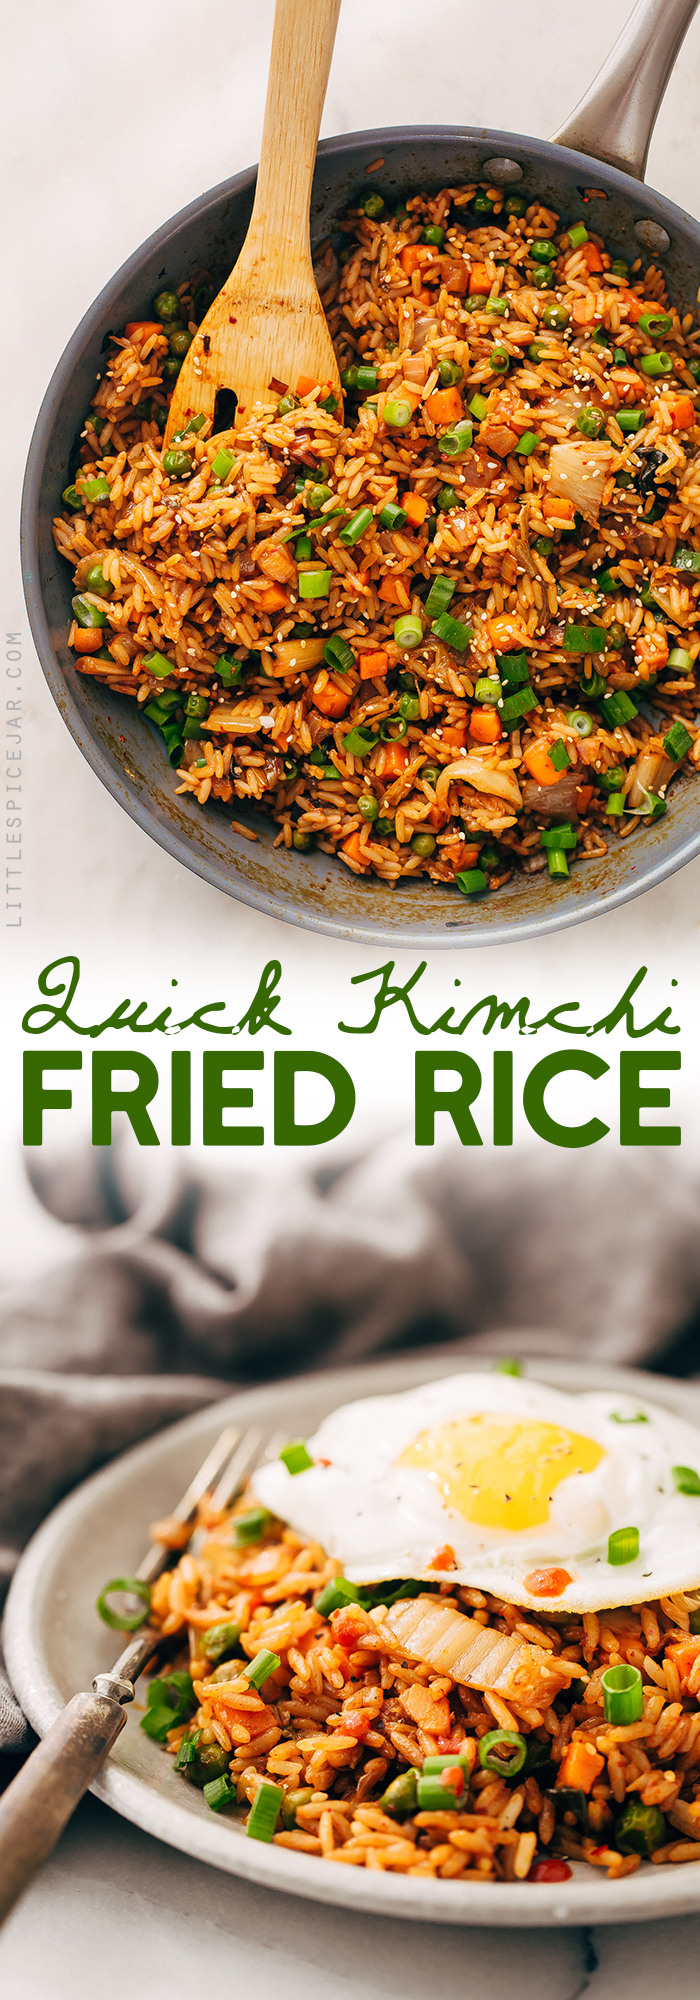 Quick Kimchi Fried Rice - Learn how to make quick and easy kimchi fried rice! Perfect to use up leftover rice! #kimchi #kimchifriedrice #friedrice #veggiefriedrice | Littlespicejar.com